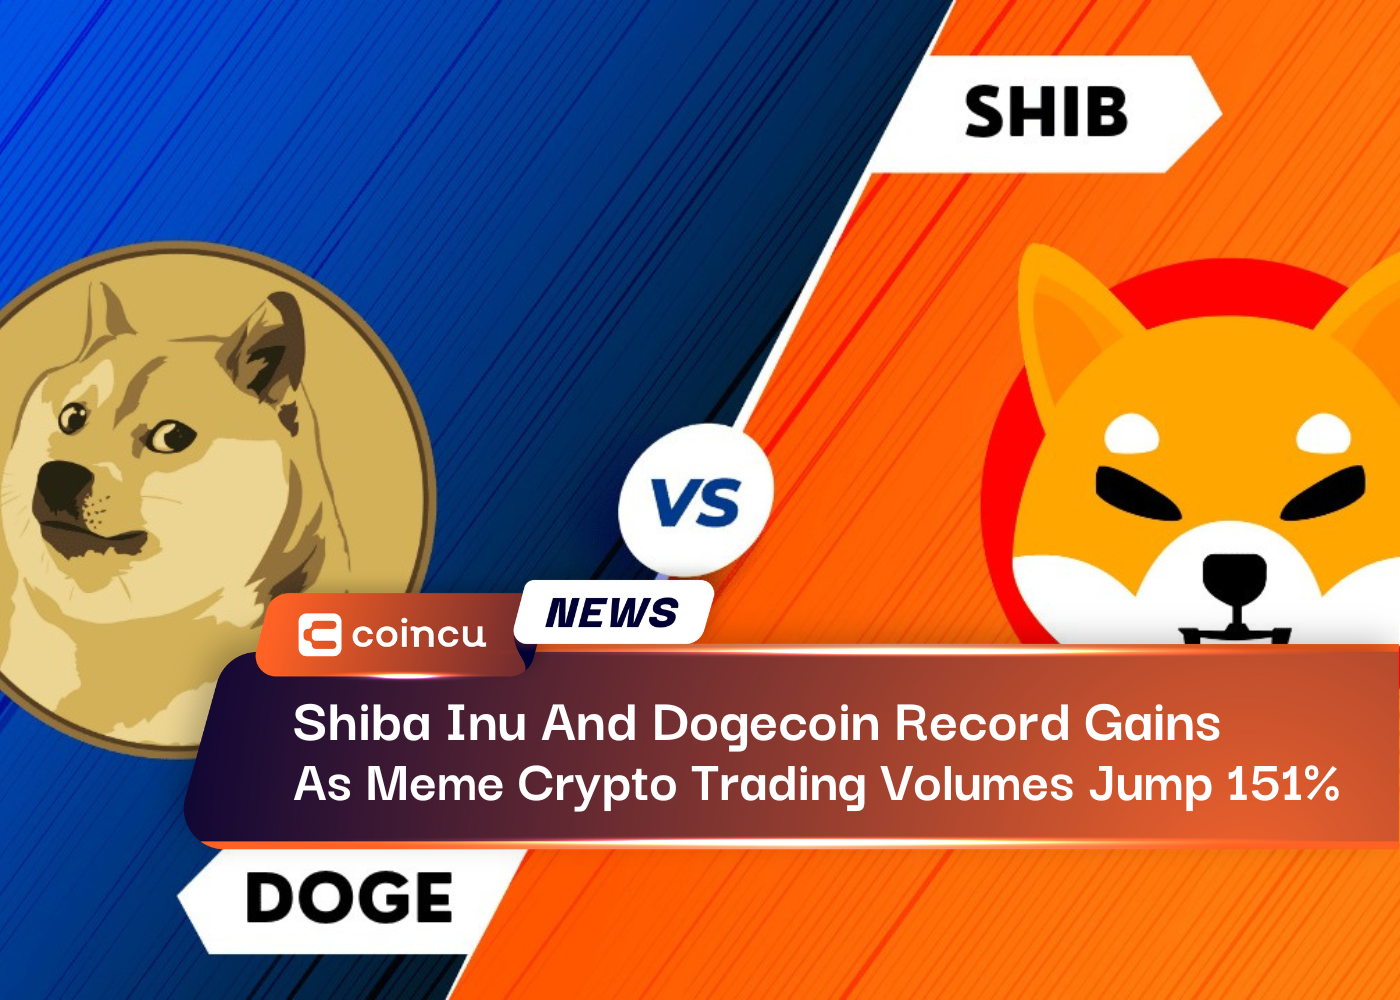 Shiba Inu And Dogecoin Record Gains